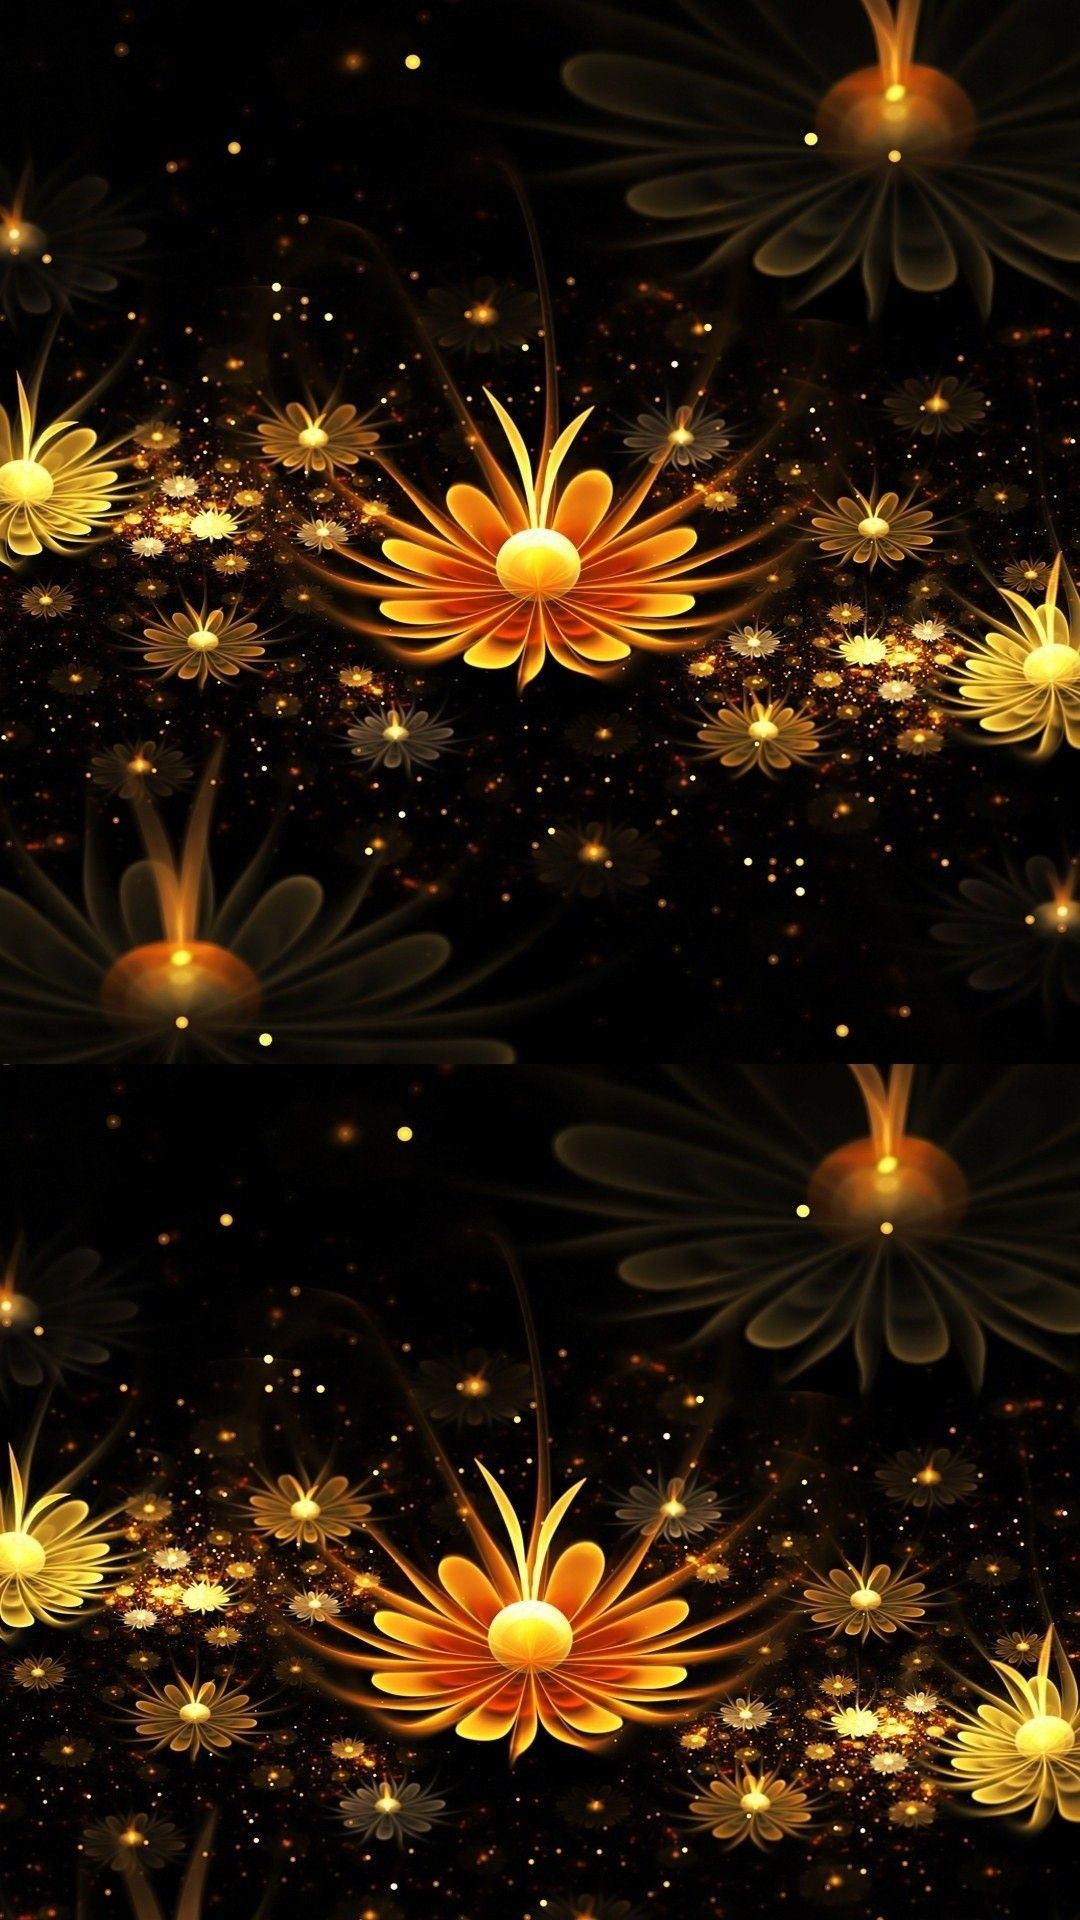 1080x1920 3D Flower Wallpaper For Mobile Android | Best HD Wallpapers